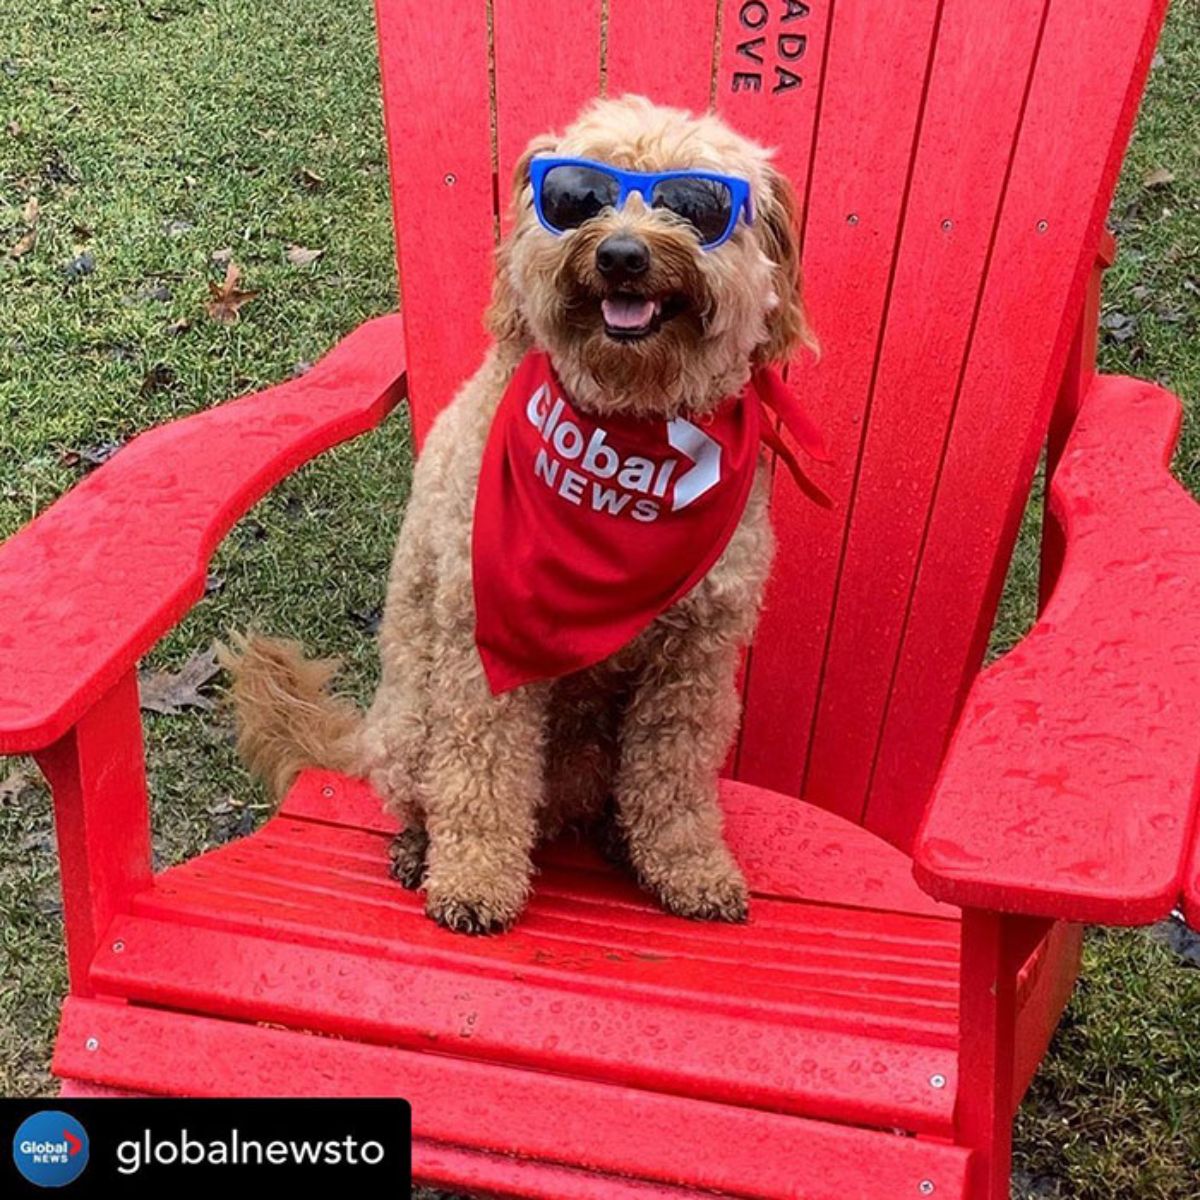 brown golden doodle sitting on a red chair wearing a red bandana and blue sunglasses